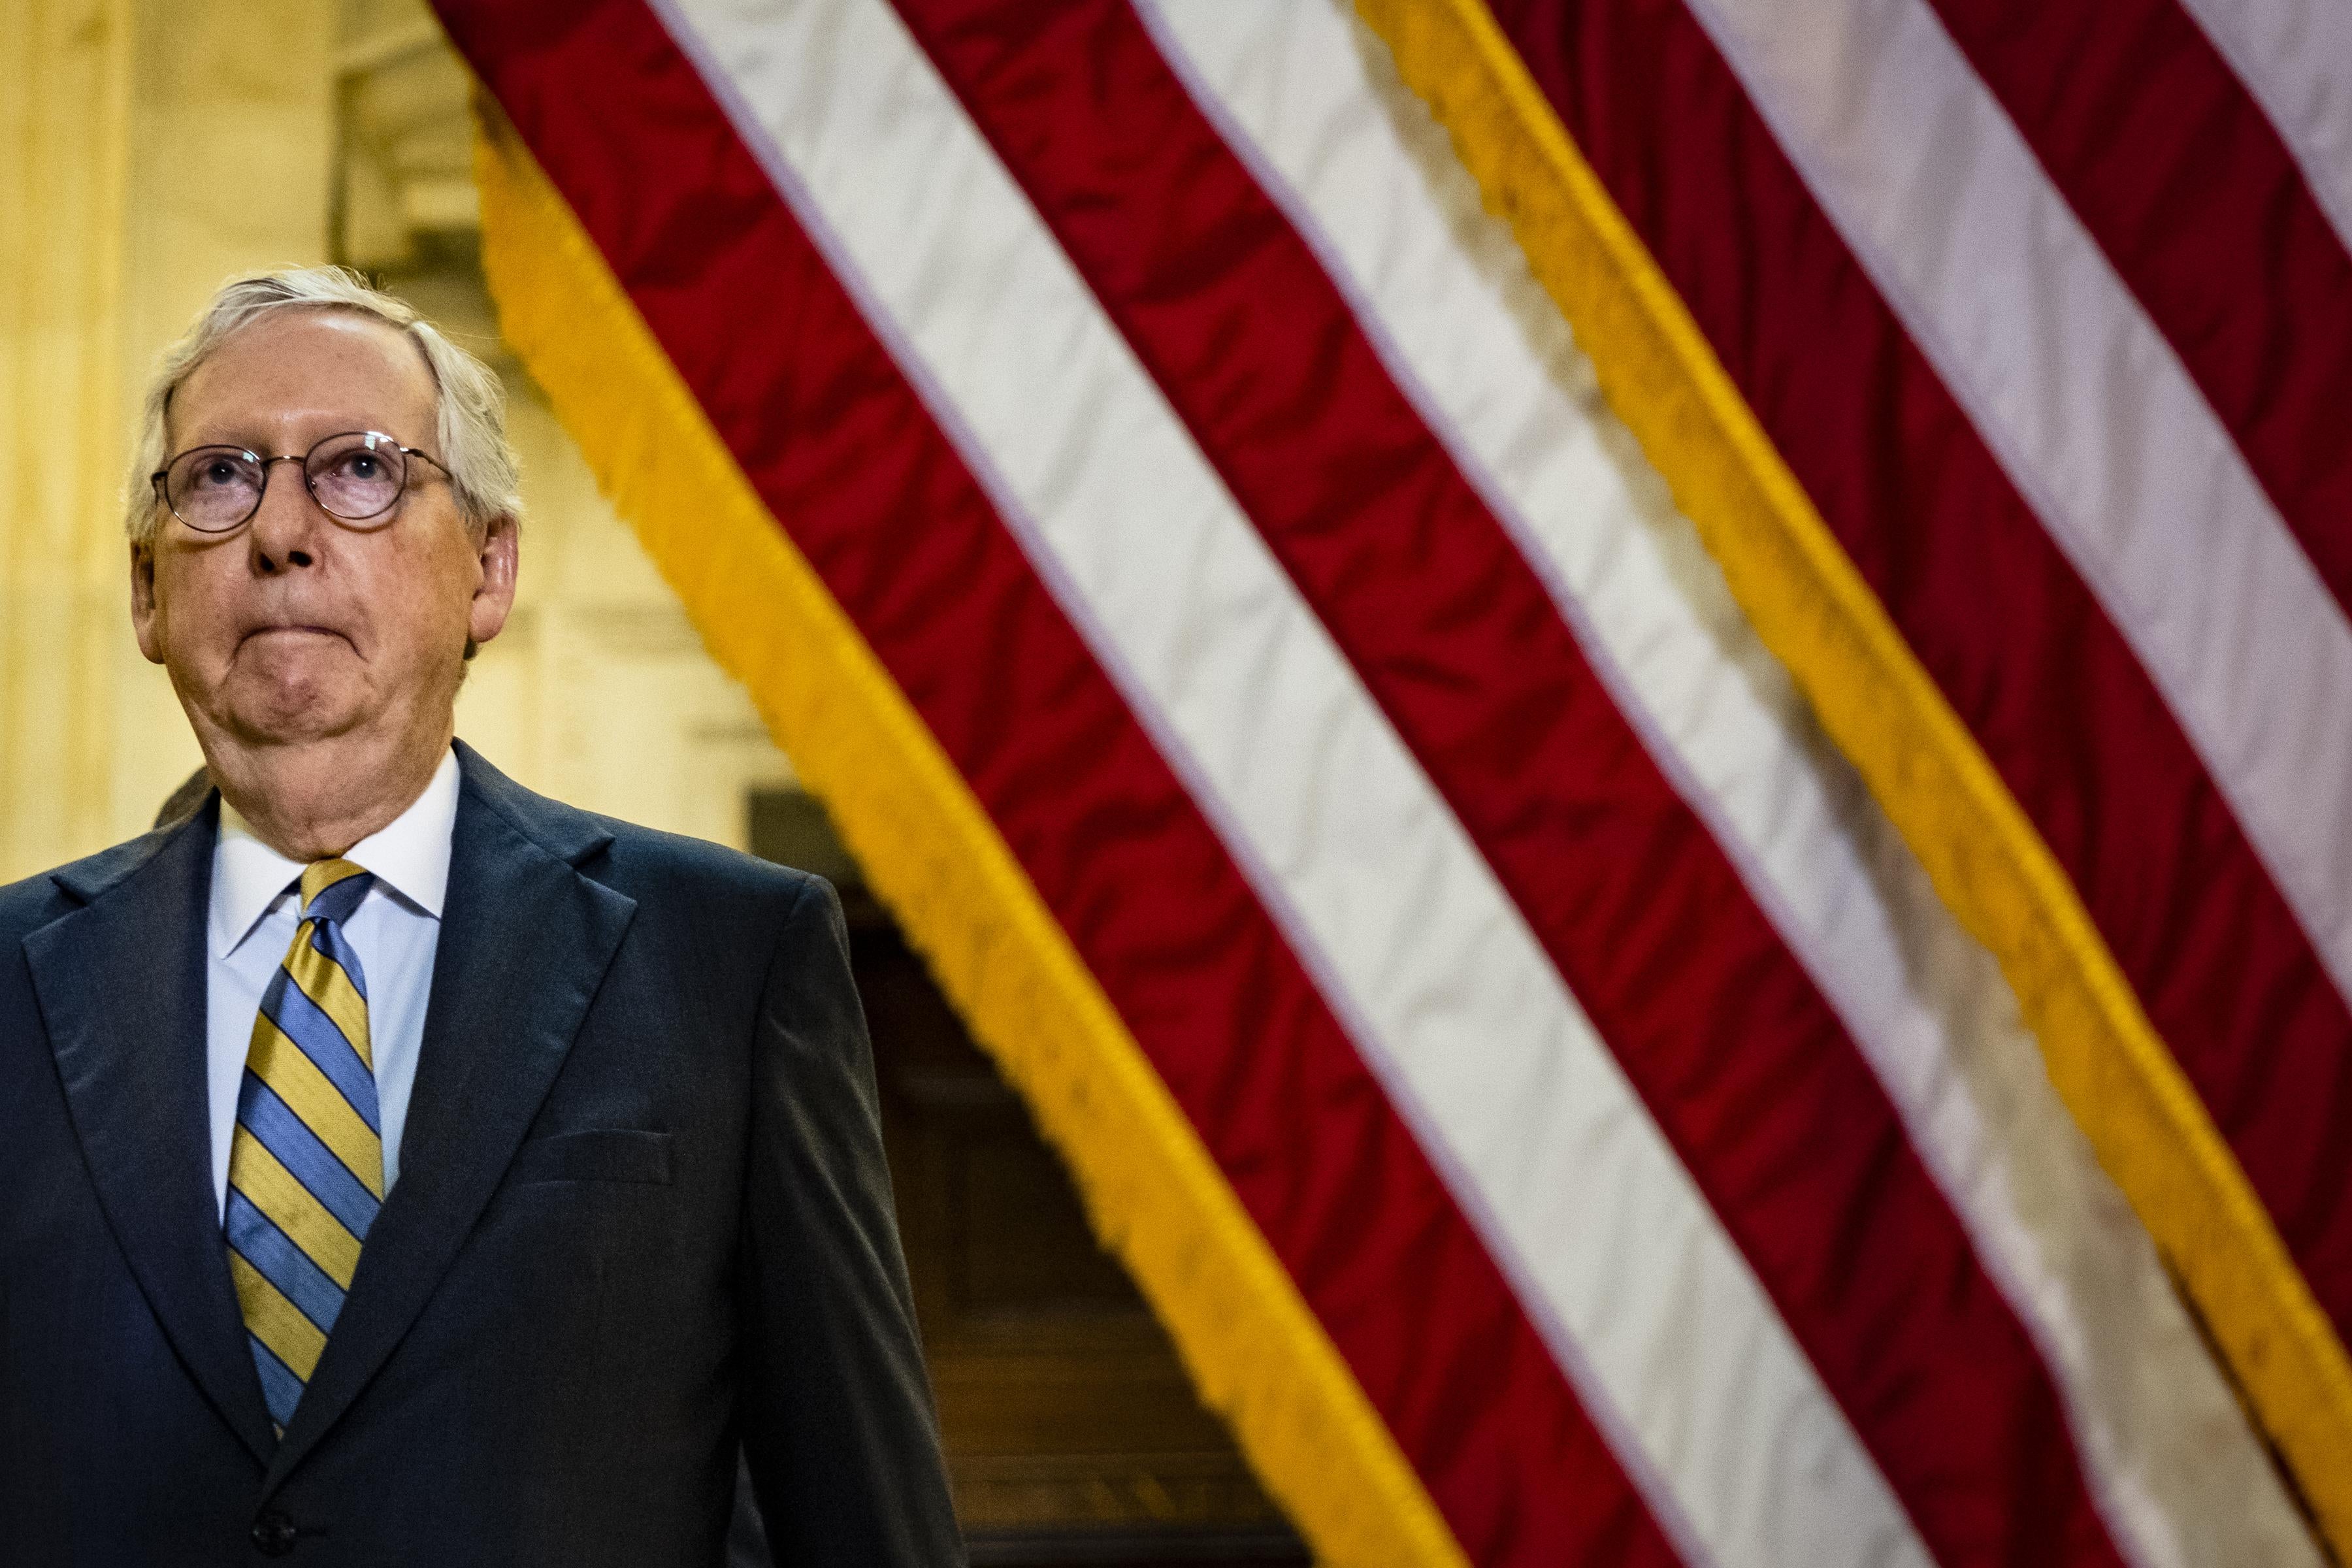 McConnell standing next to a flag